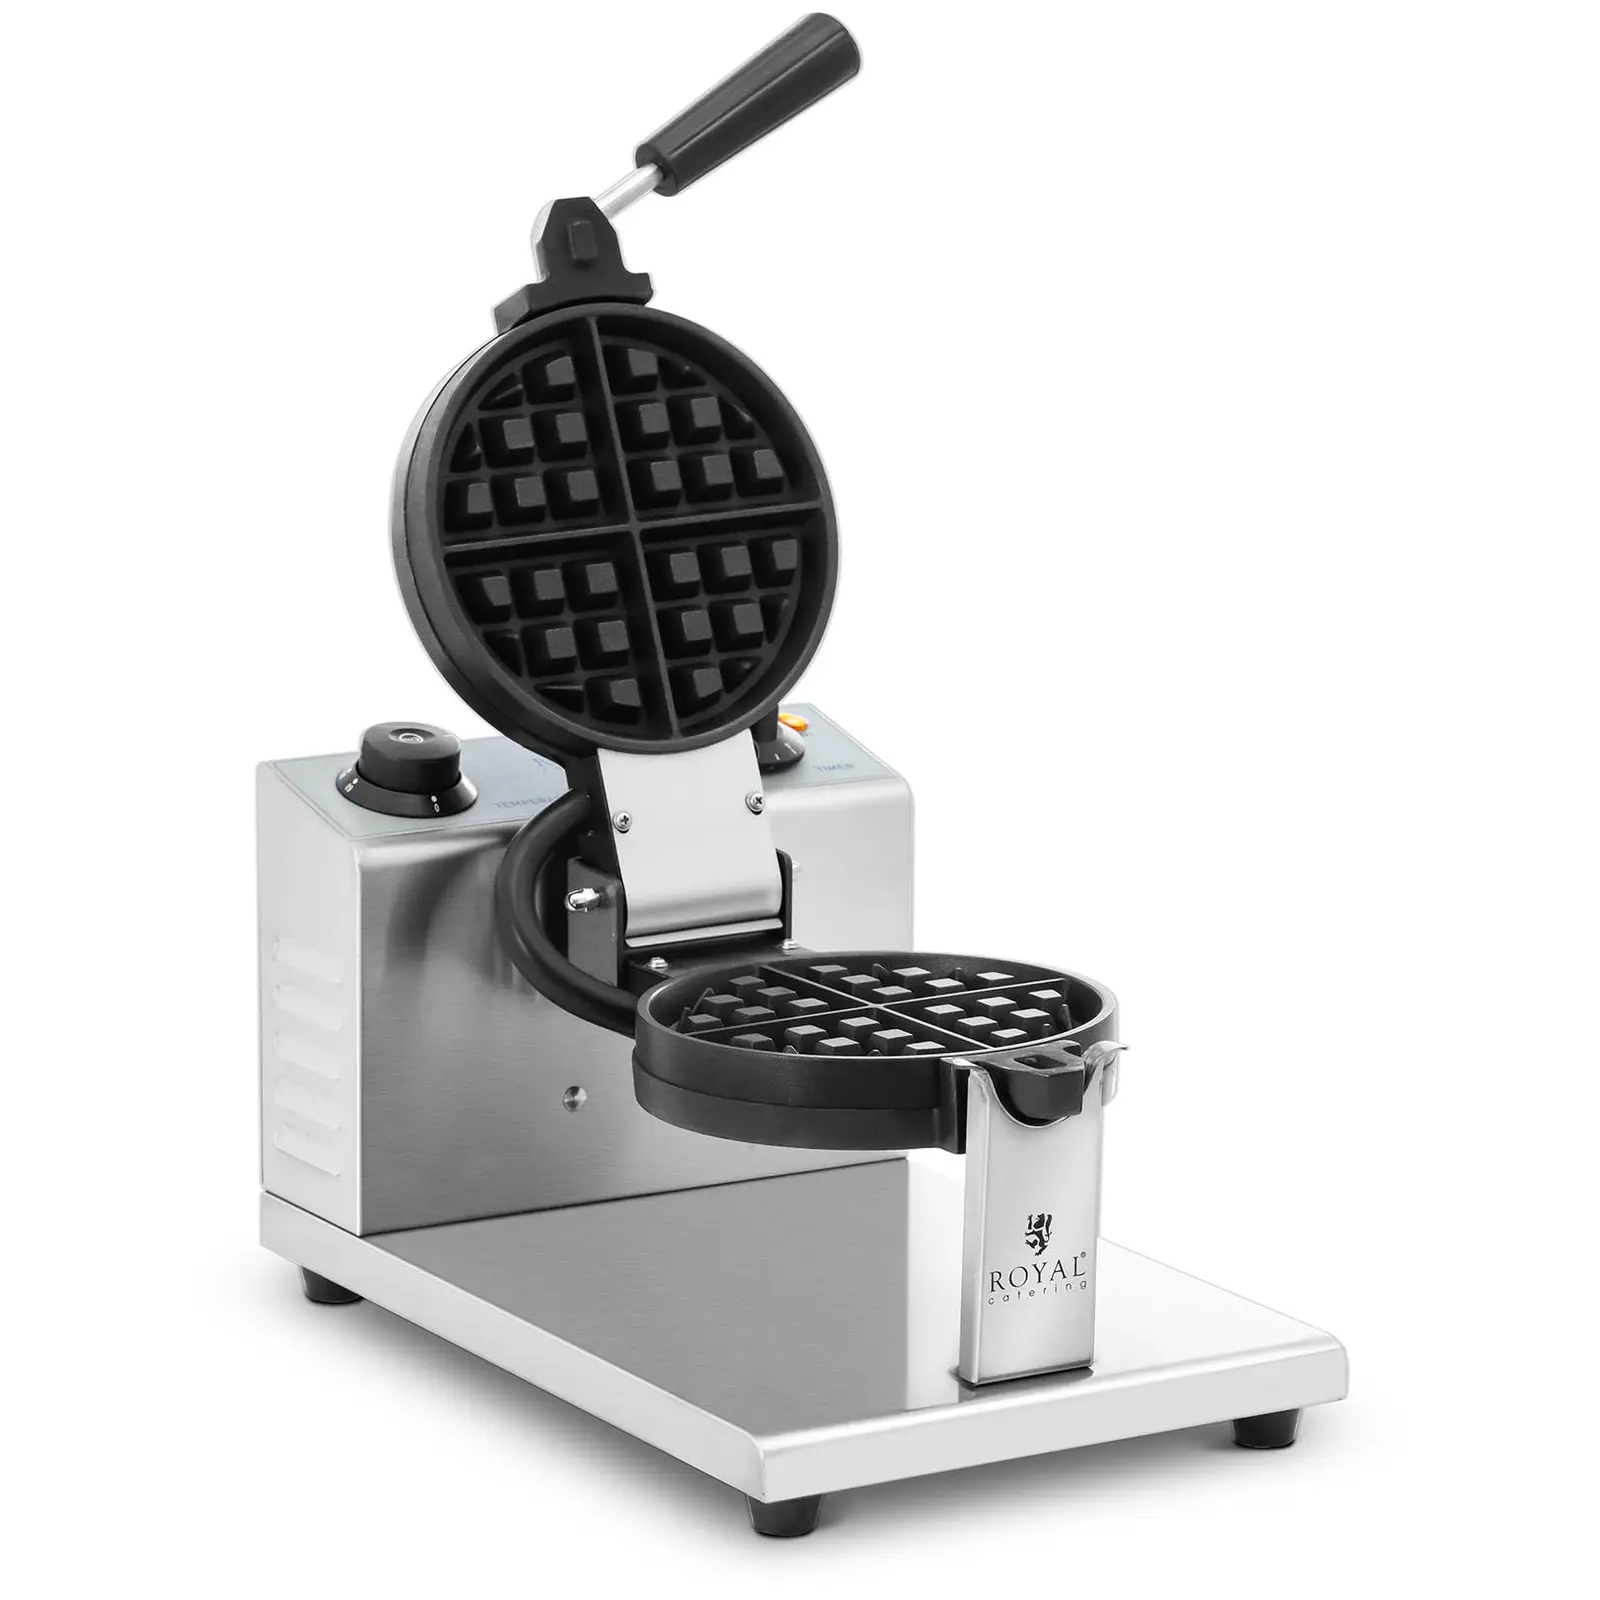 Occasion Gaufrier professionnel – rond – 4 petites gaufres – 1200 W – Royal Catering